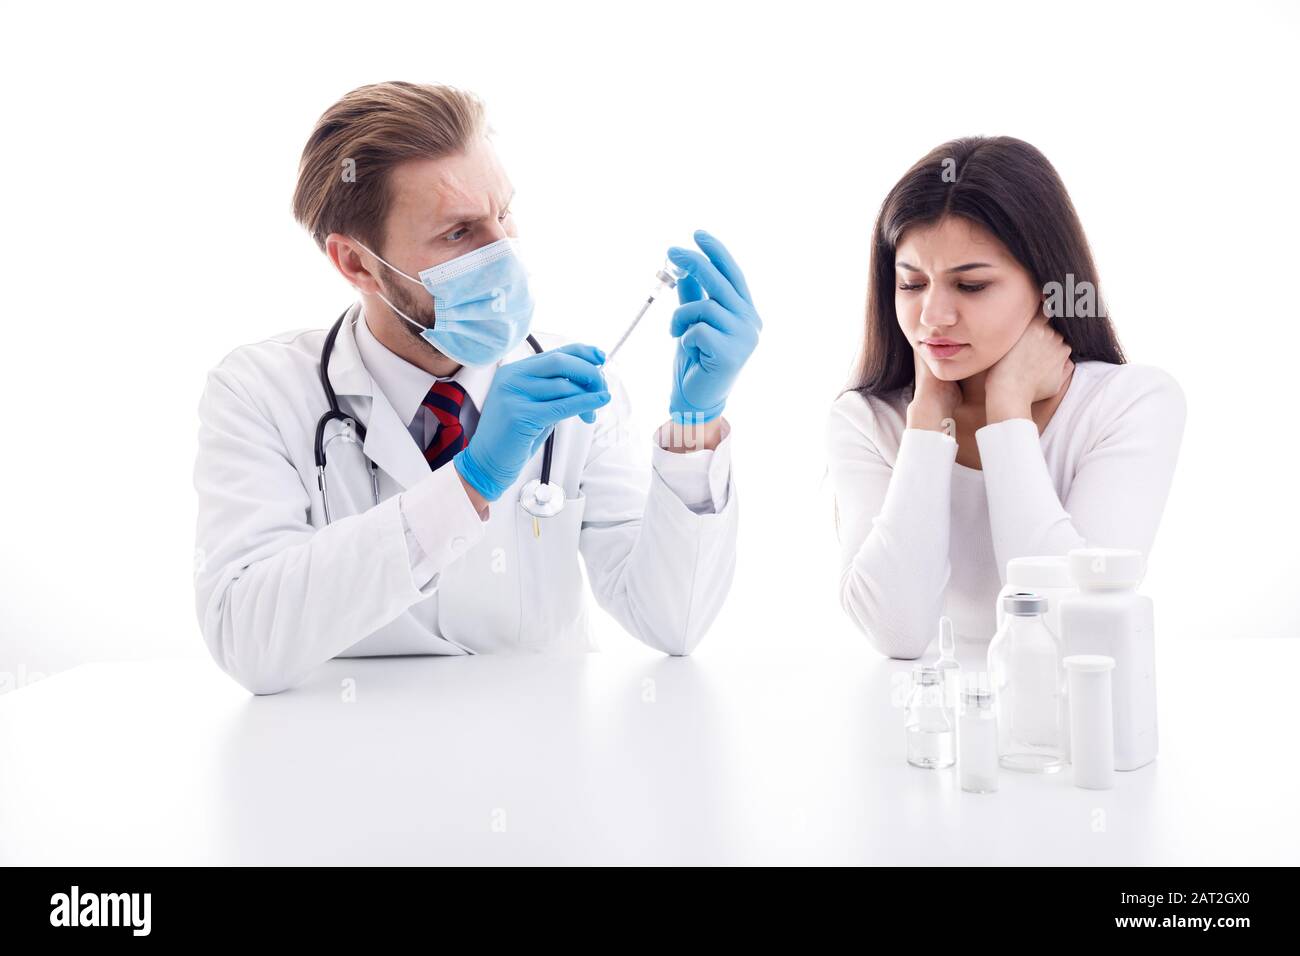 Careful Doctor in Mask Loading a Syringe of Vaccine While Patient Waiting Stock Photo